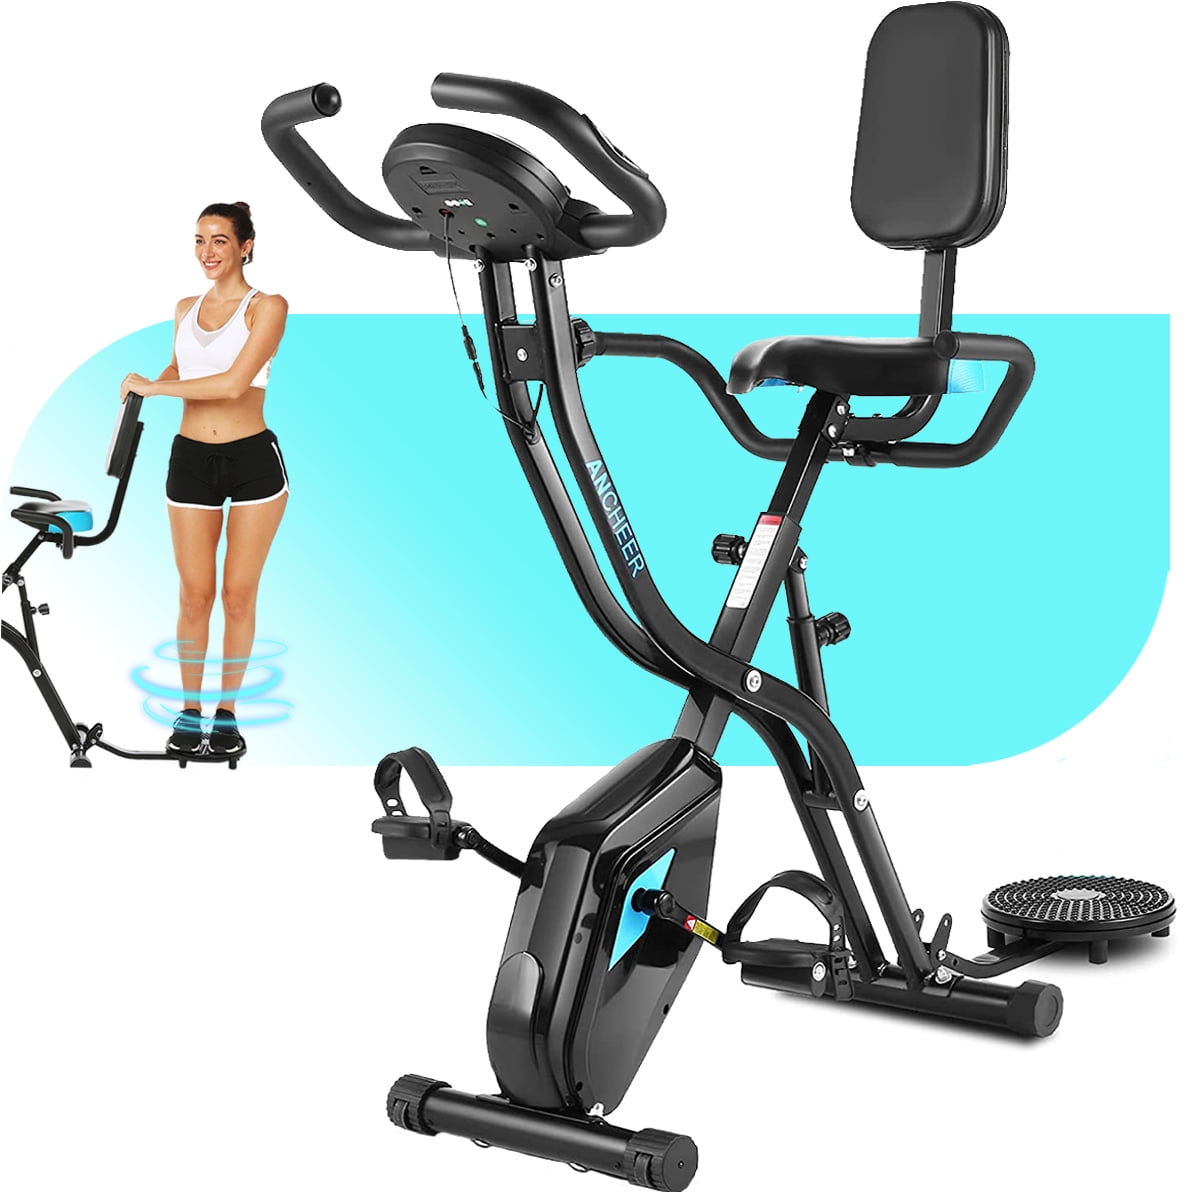 Details about   Stationary Upright Bike Cycling Exercise Bicycle Cardio Fitness Gym Workout e 48 